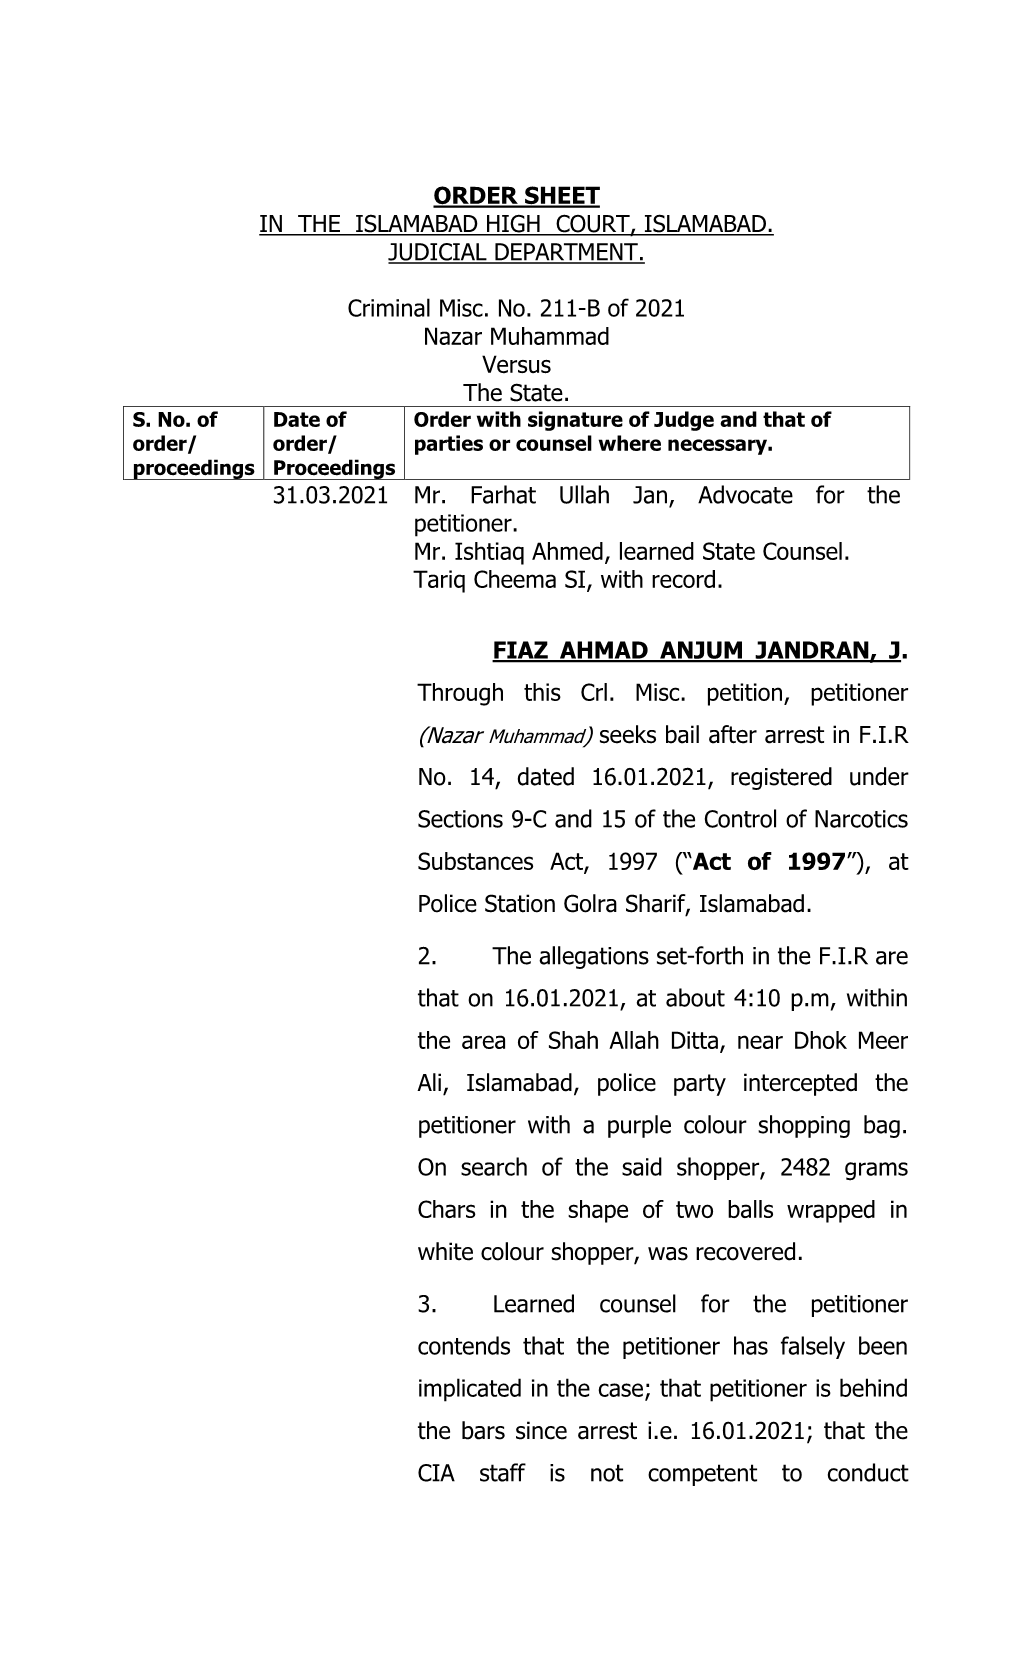 ORDER SHEET in the ISLAMABAD HIGH COURT, ISLAMABAD. JUDICIAL DEPARTMENT. Criminal Misc. No. 211-B of 2021 Nazar Muhammad